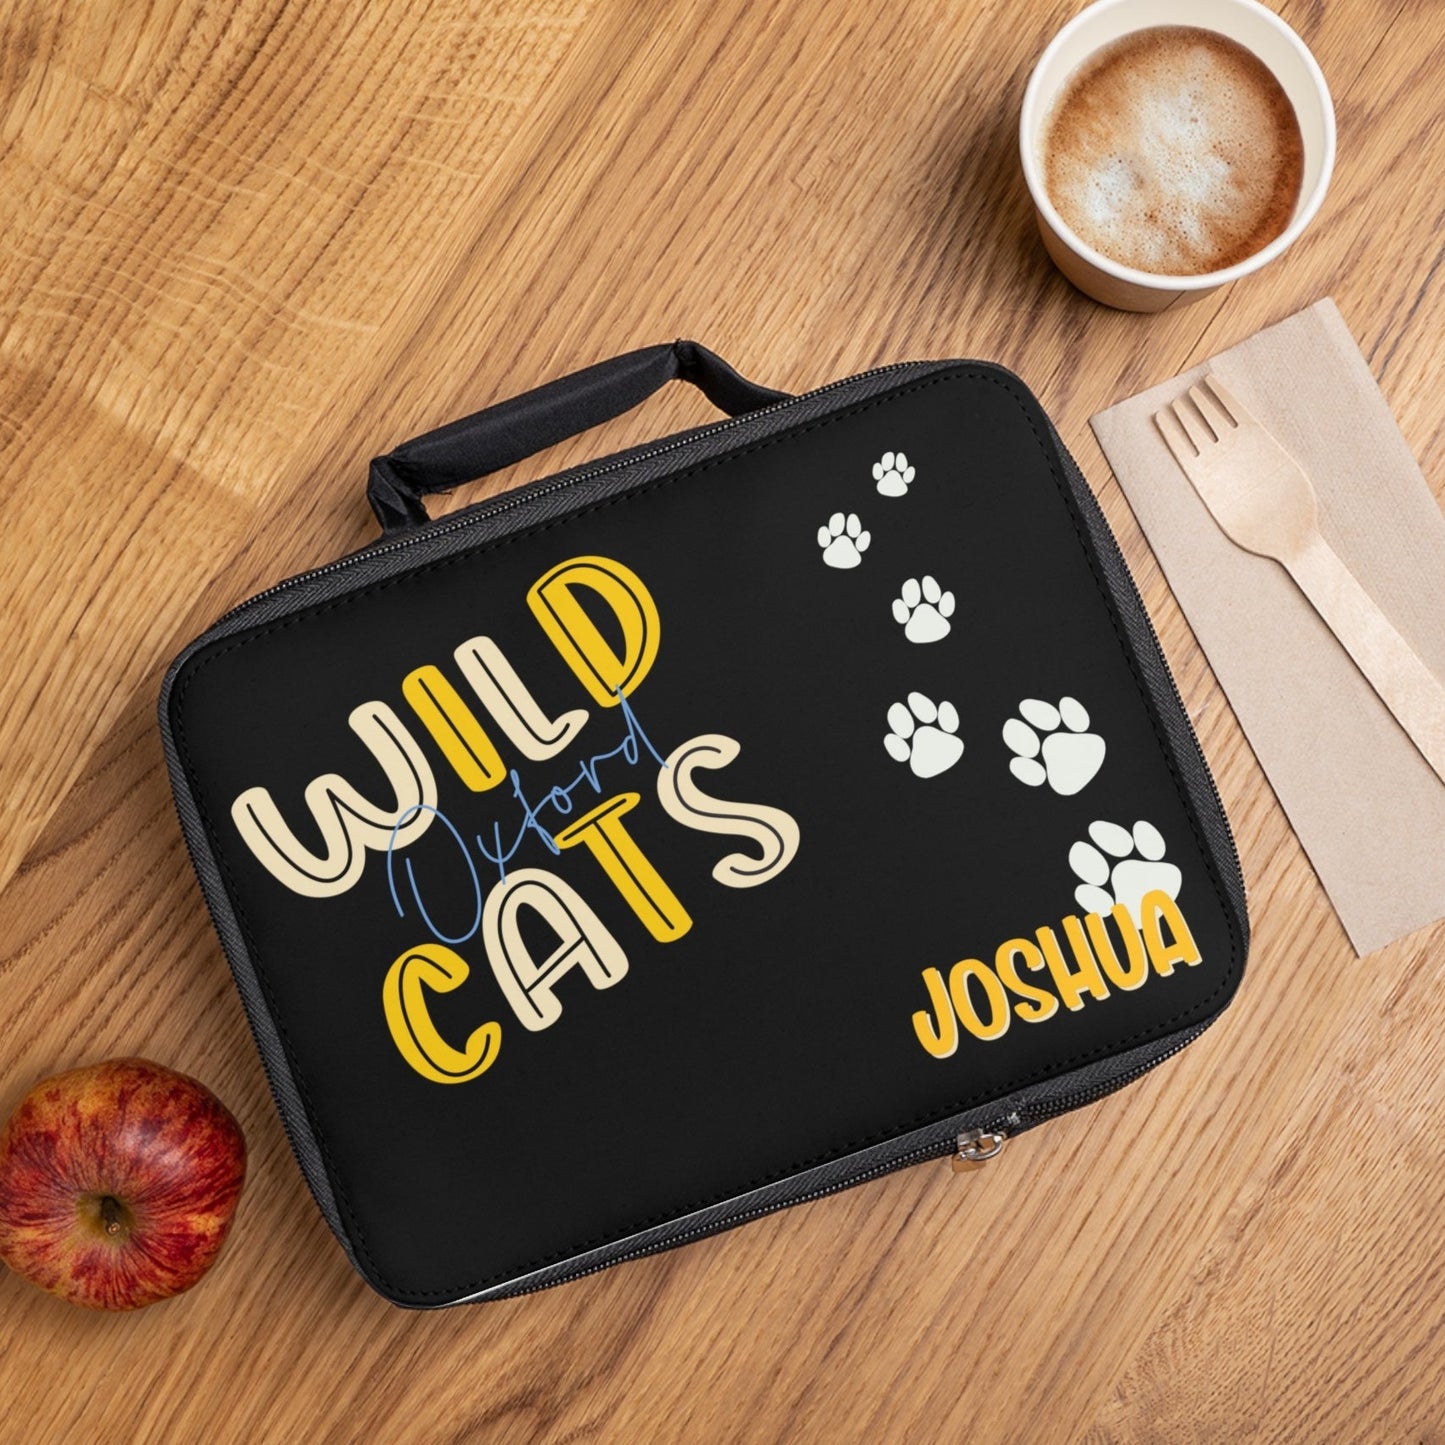 Personalized Oxford Wildcat Black Lunch Box